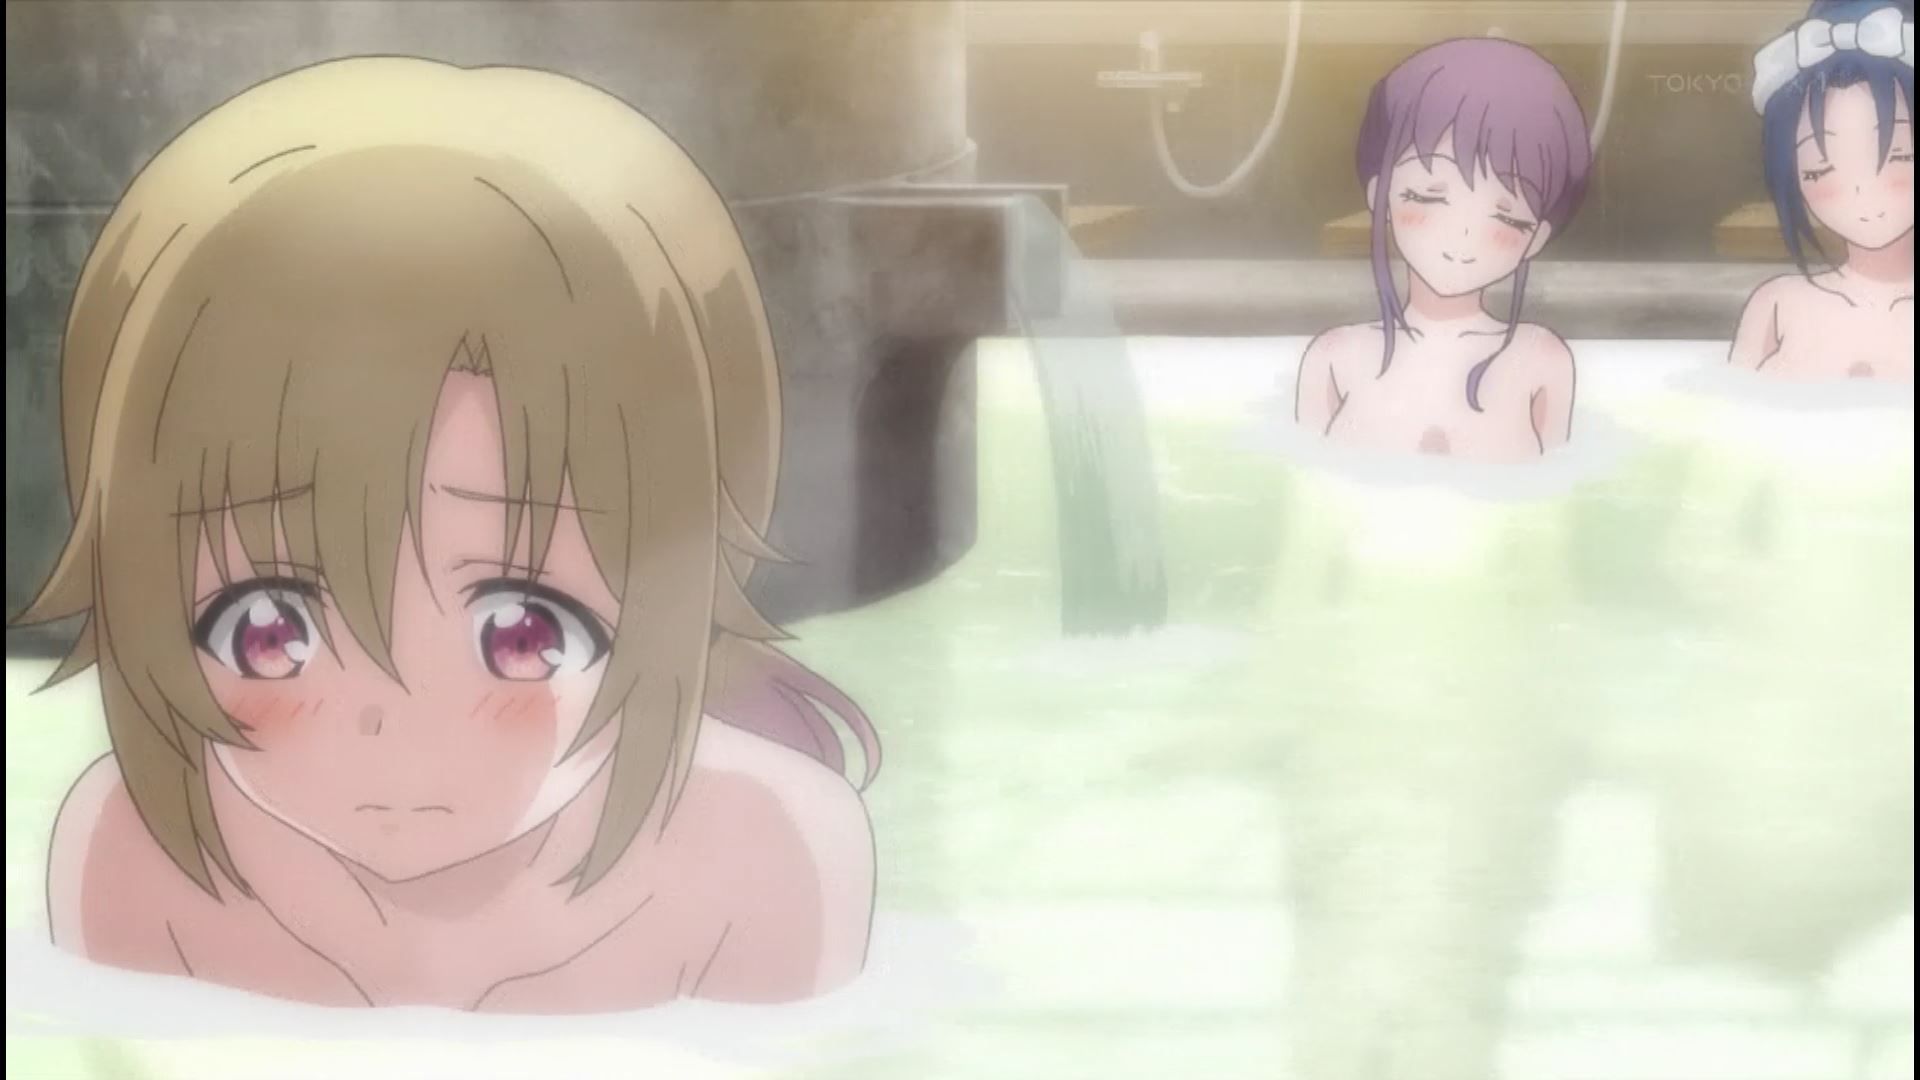 Anime [Armored Daughter Fighting Machine] 7 stories such as hot spring bathing scene where girls' nakedness is not glowing! 7